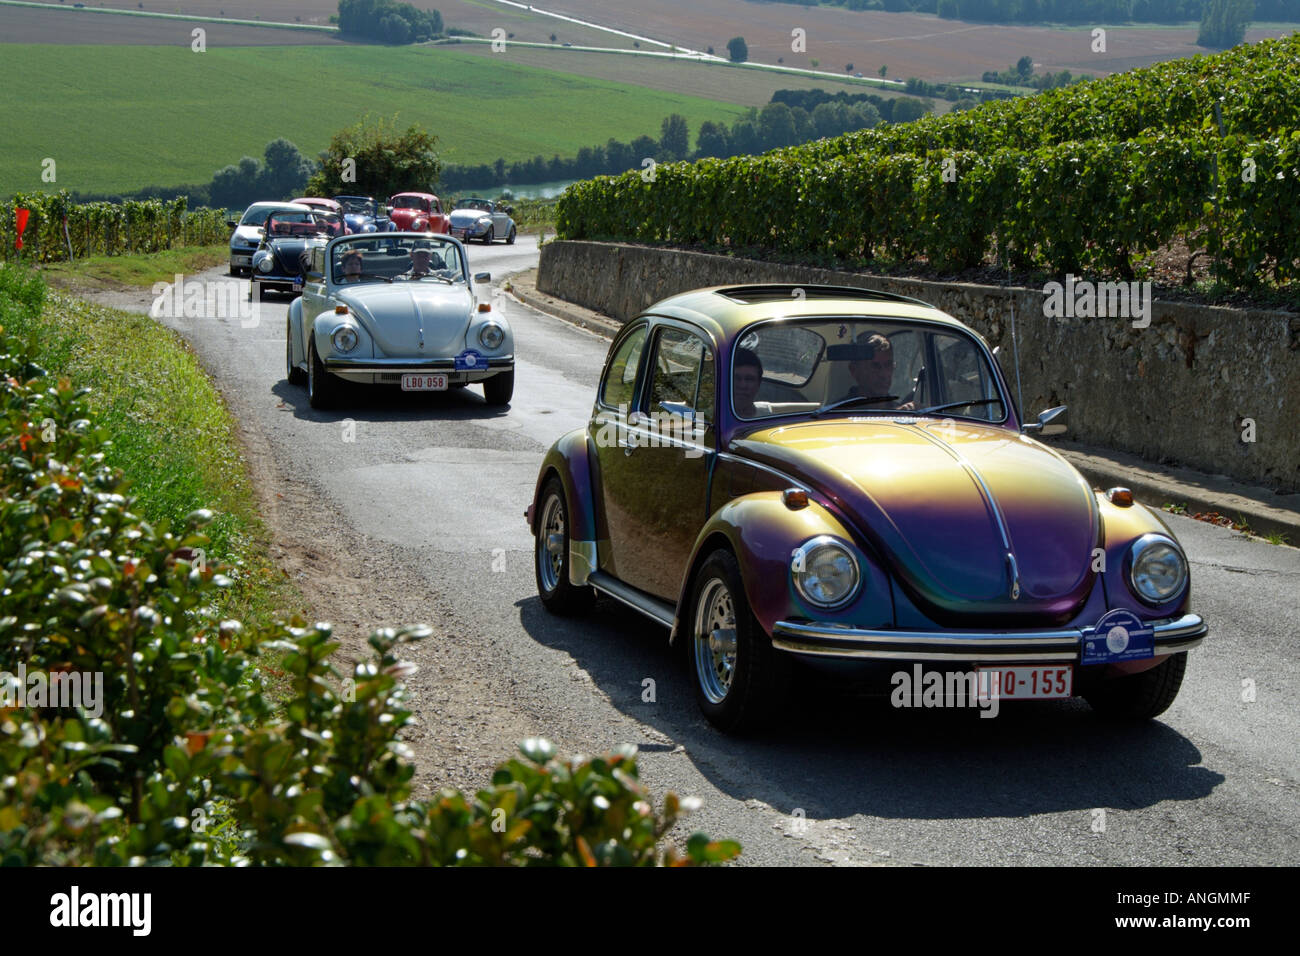 VW Beetle classic cars on tour in the Champagne region of France Europe EU Stock Photo